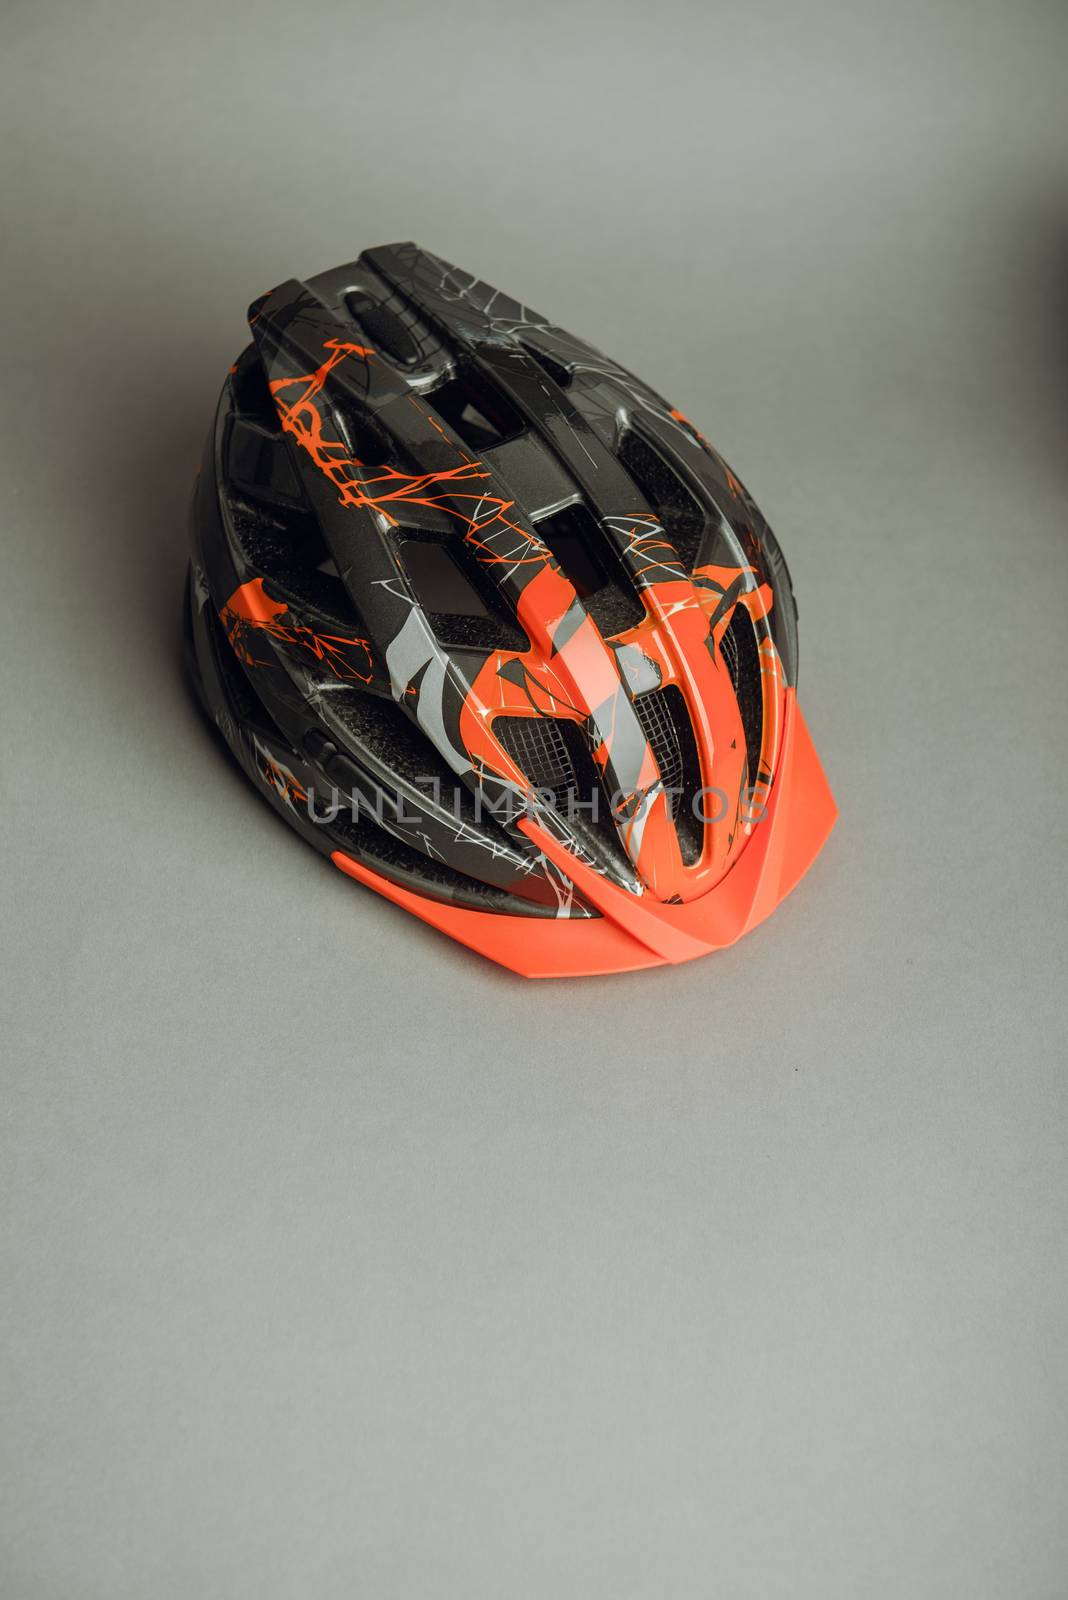 Helmet, gloves, shoes and water bottle - bicycle accessories. Orange color